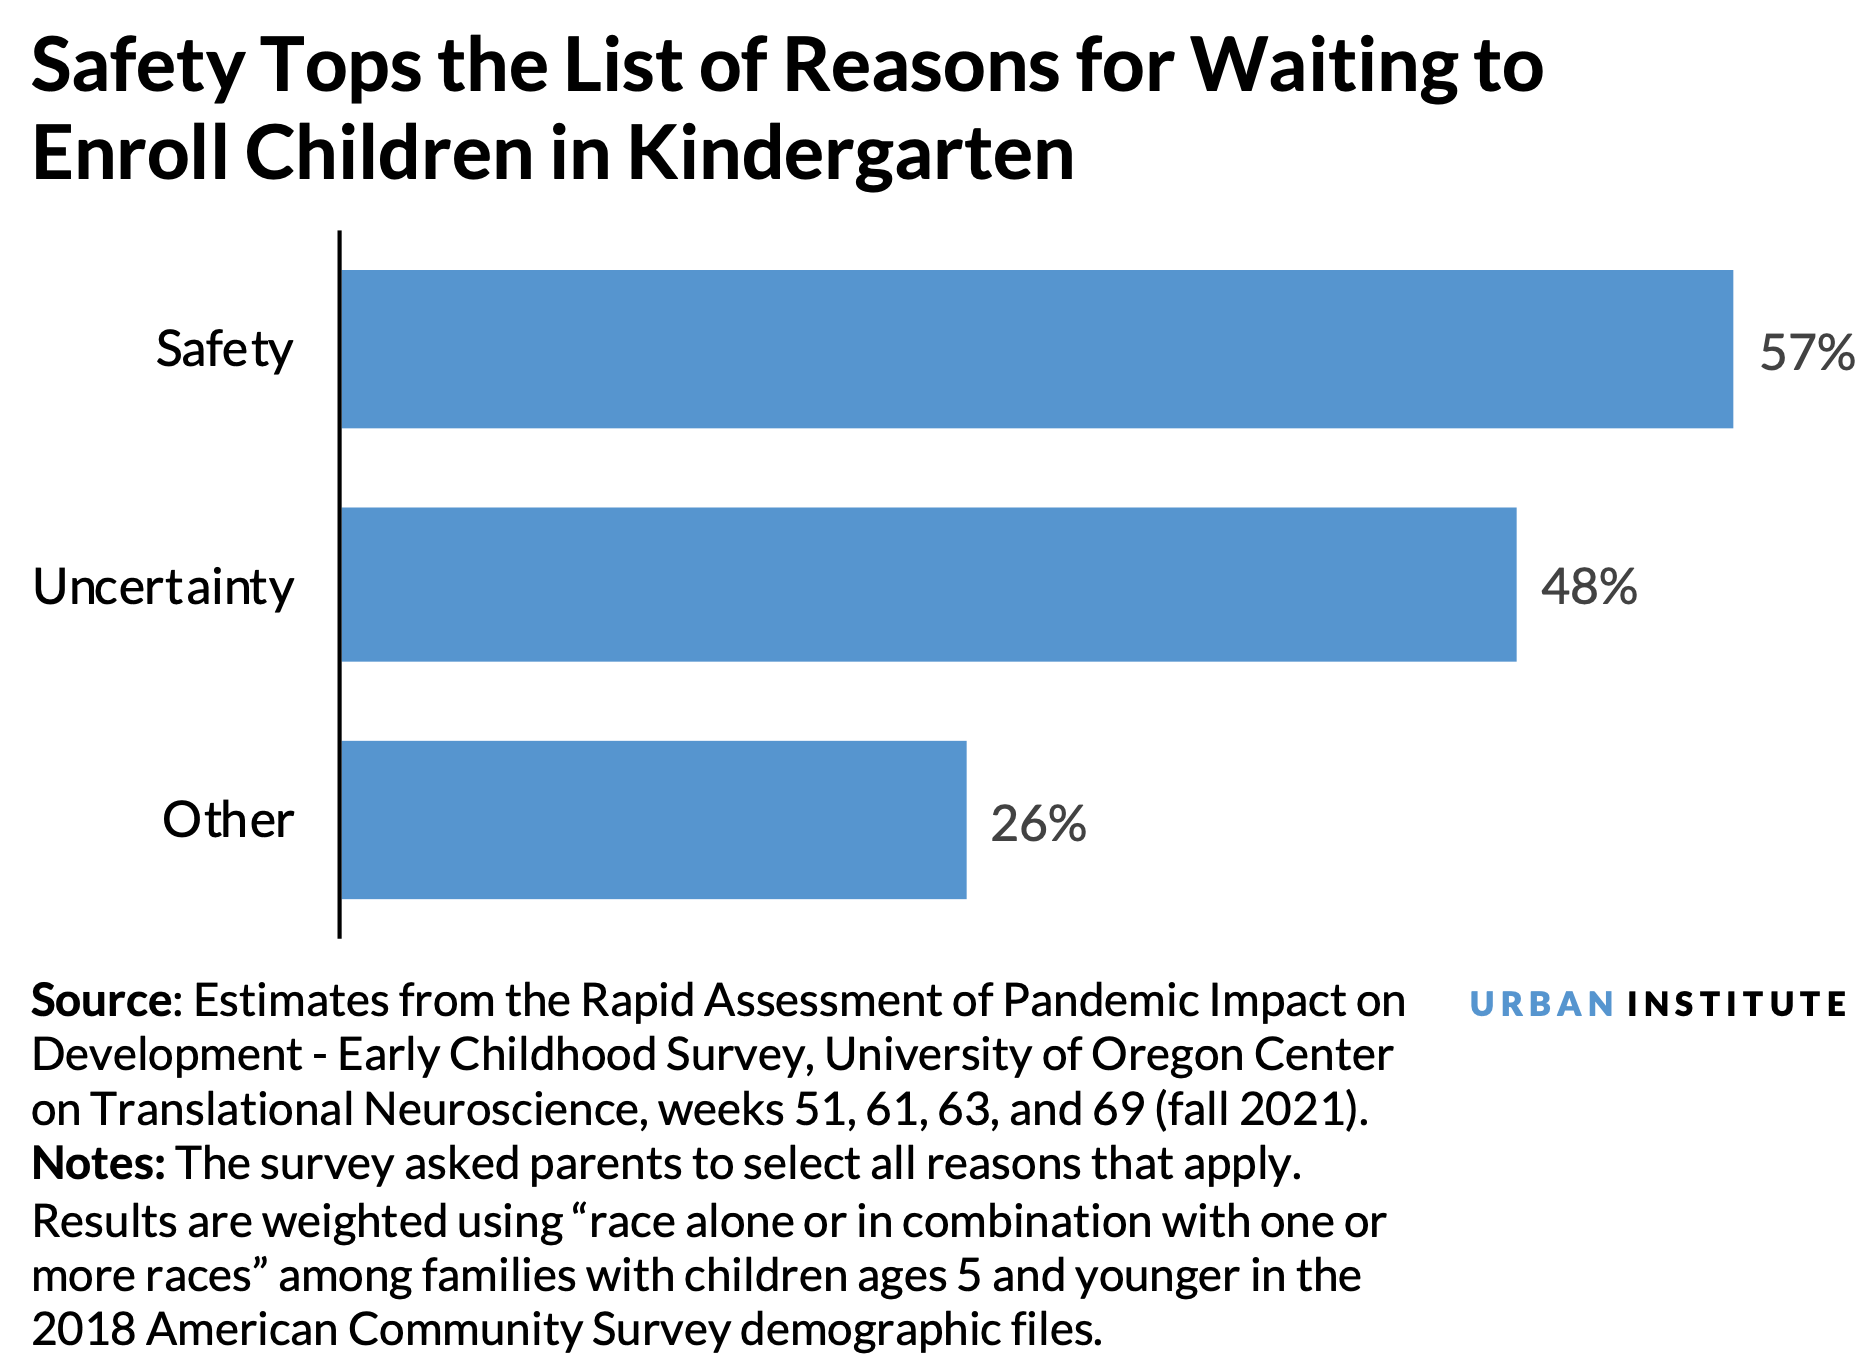 A horizontal bar chart showing the safety and uncertainty as the main reasons for why families delayed enrolling children in kindergarten in 2020 and 2021. 